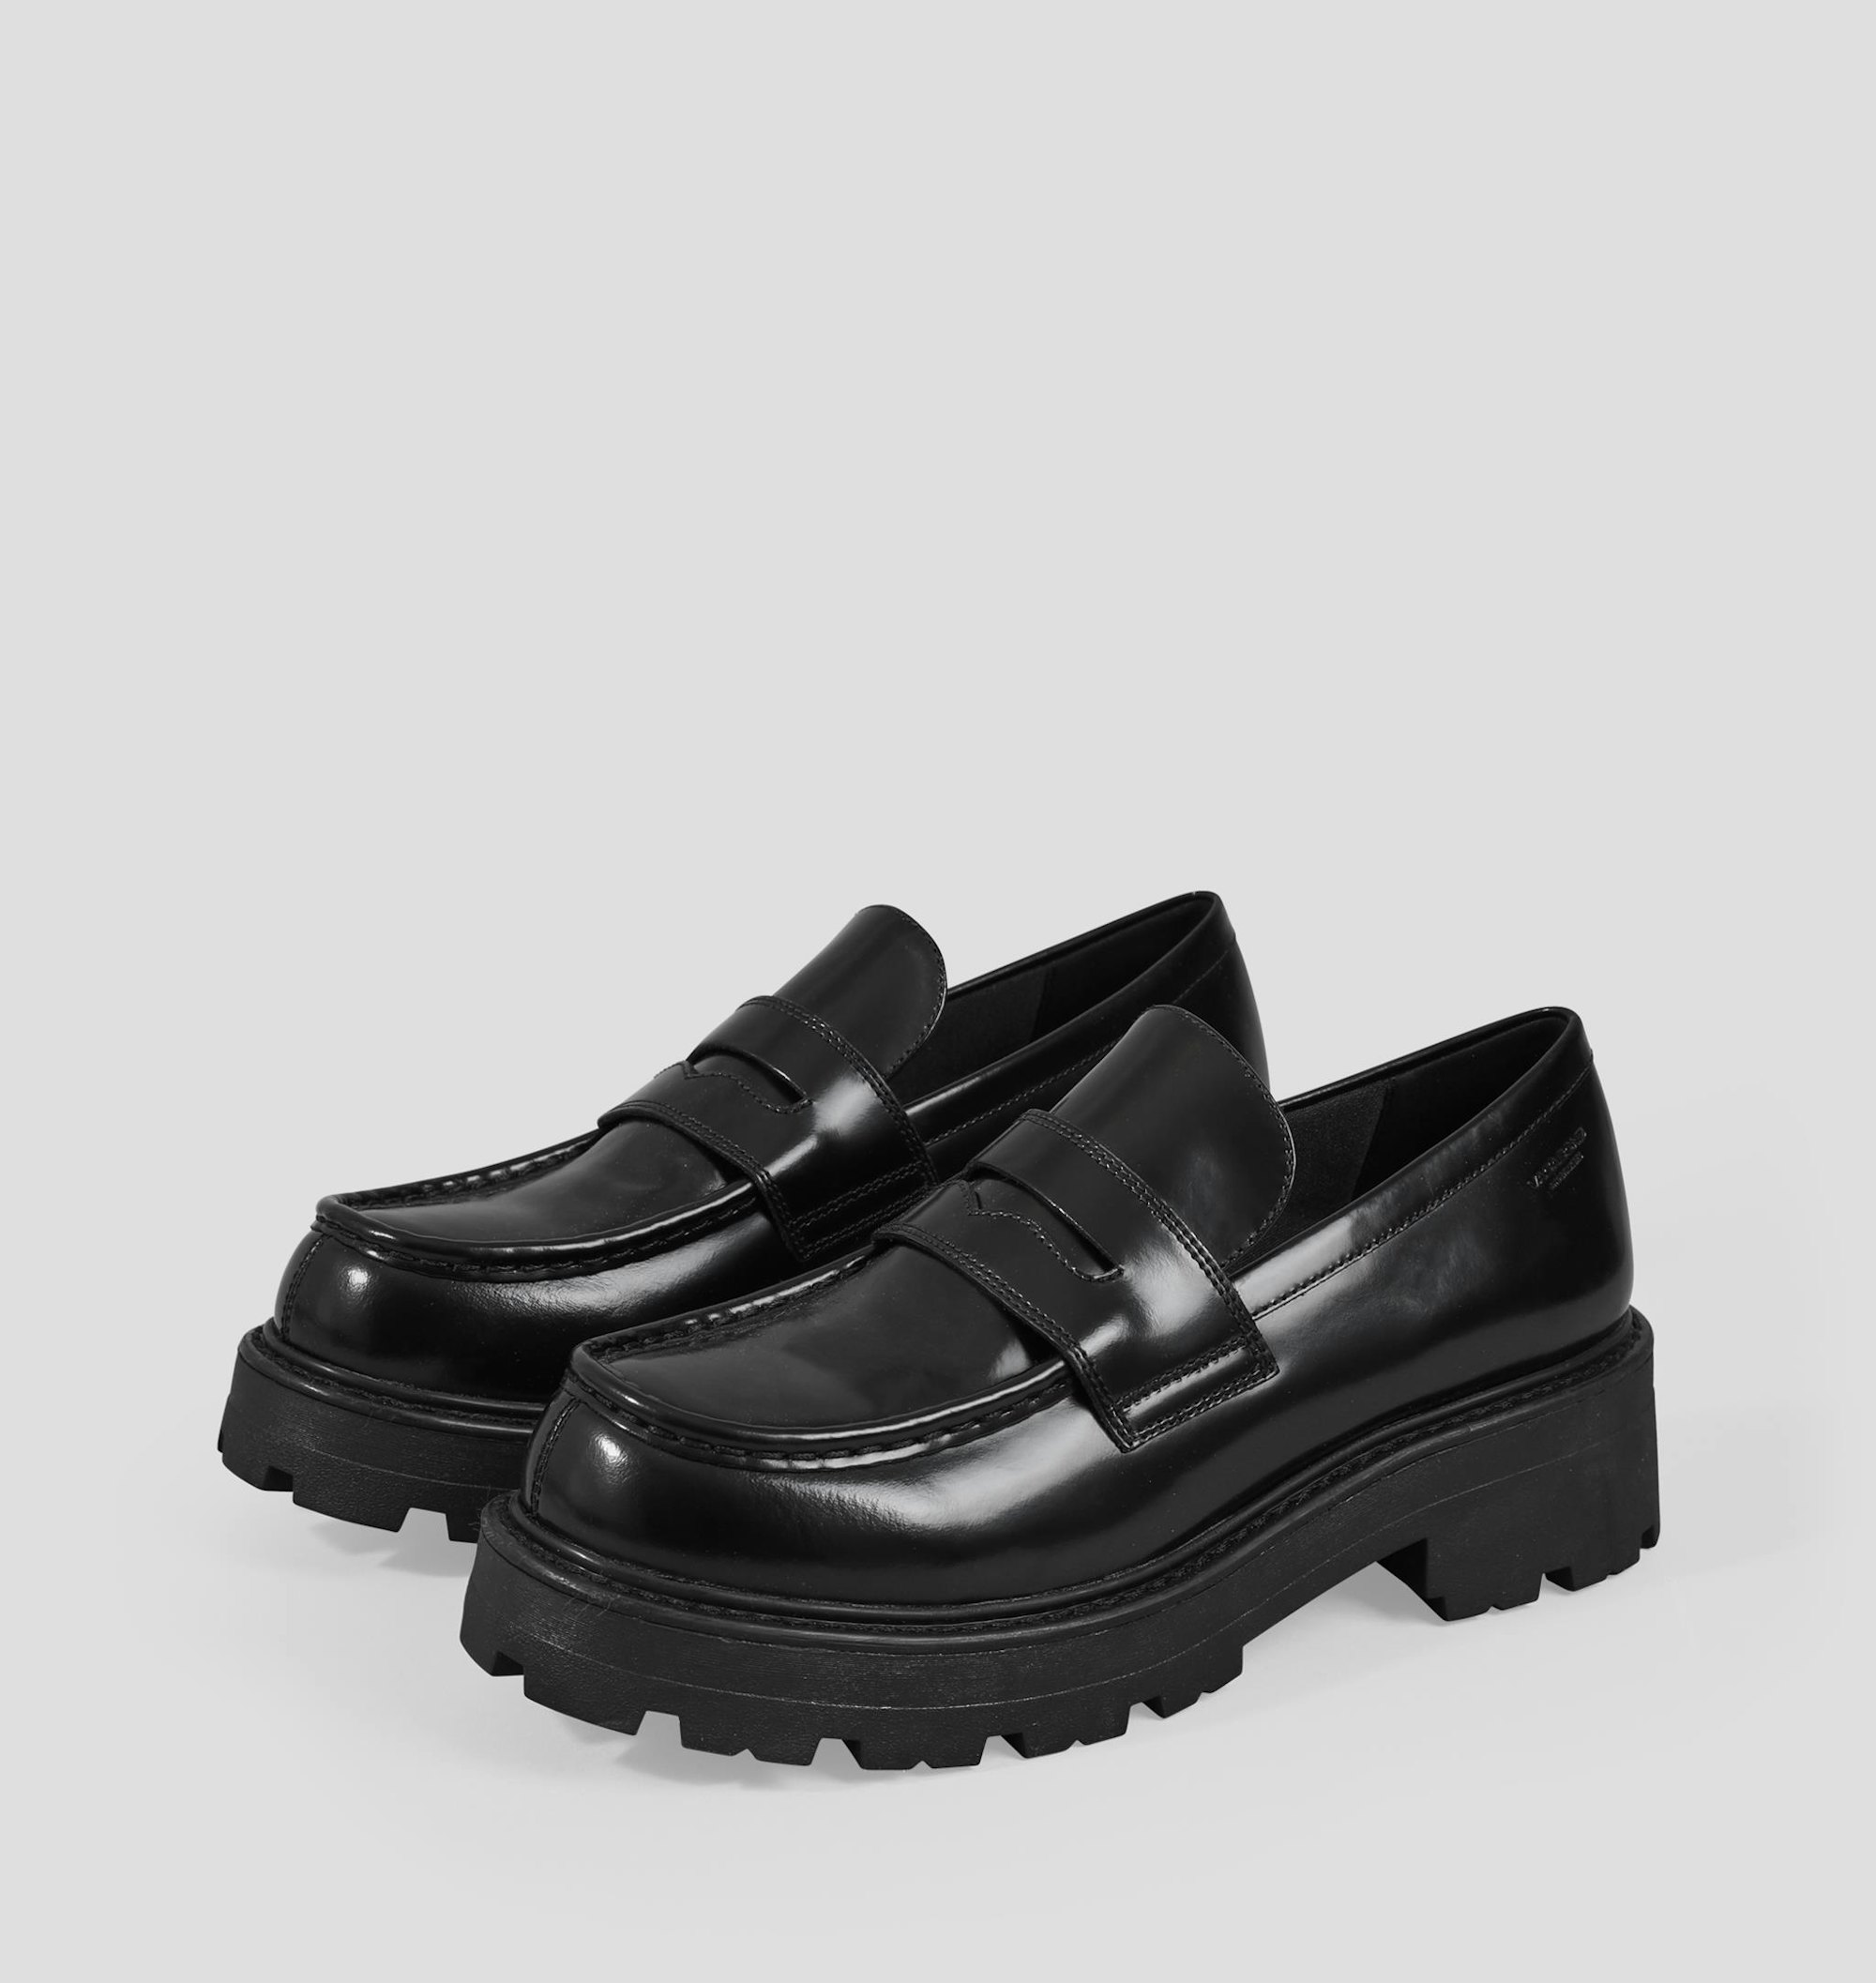 Shop Chunky Platform Loafers For Fall 2020, Including Dr. Martens